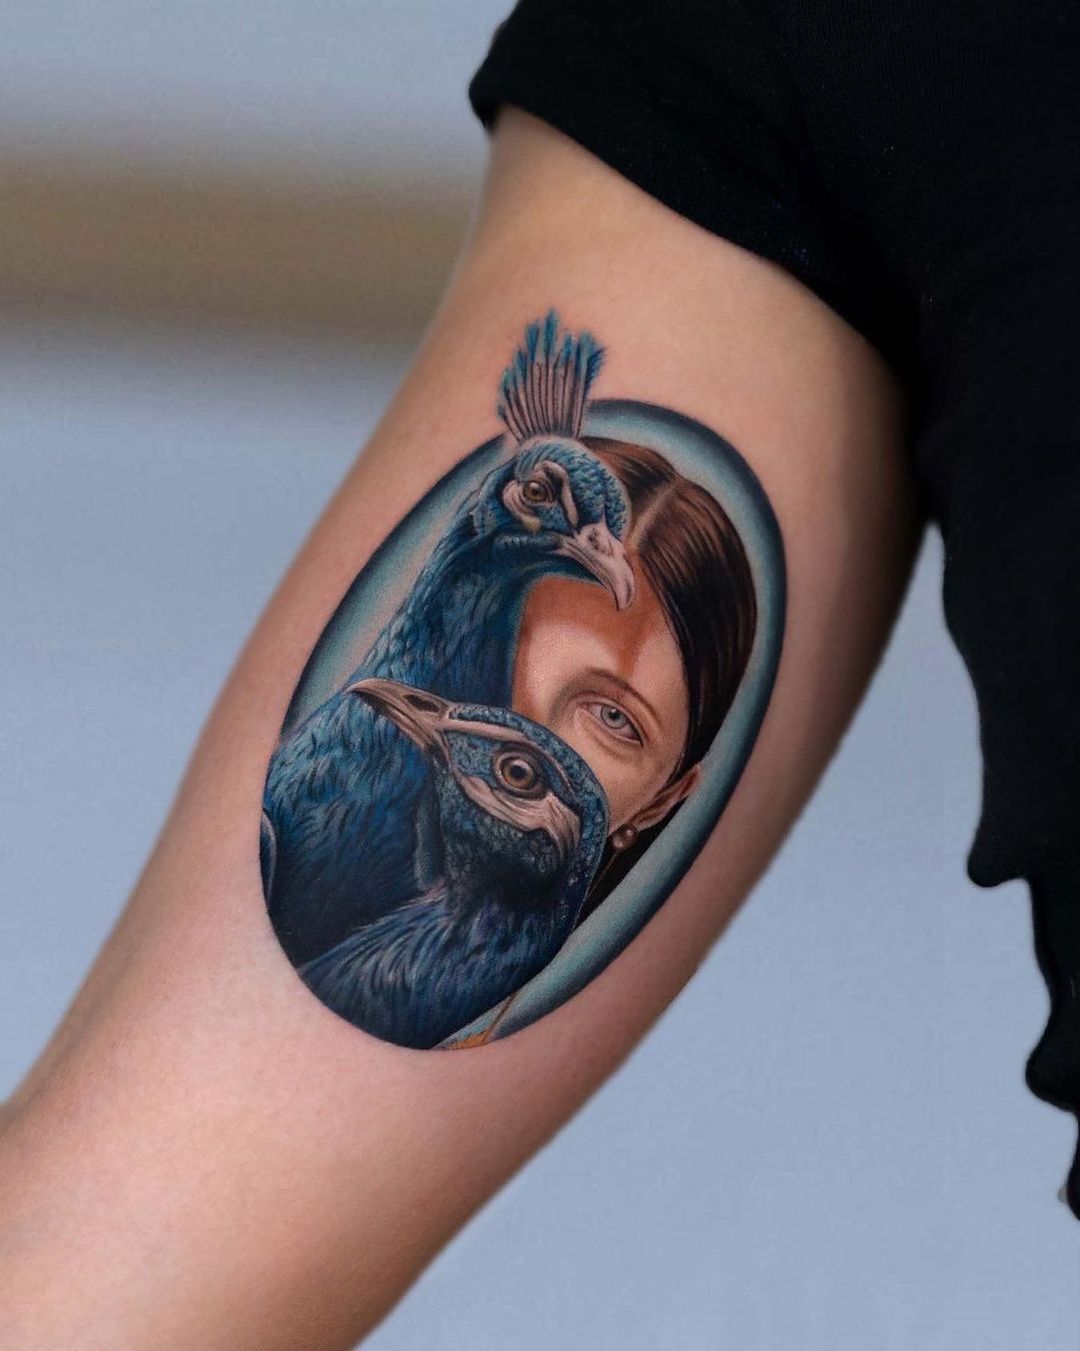 Realistic peacock tattoo design by